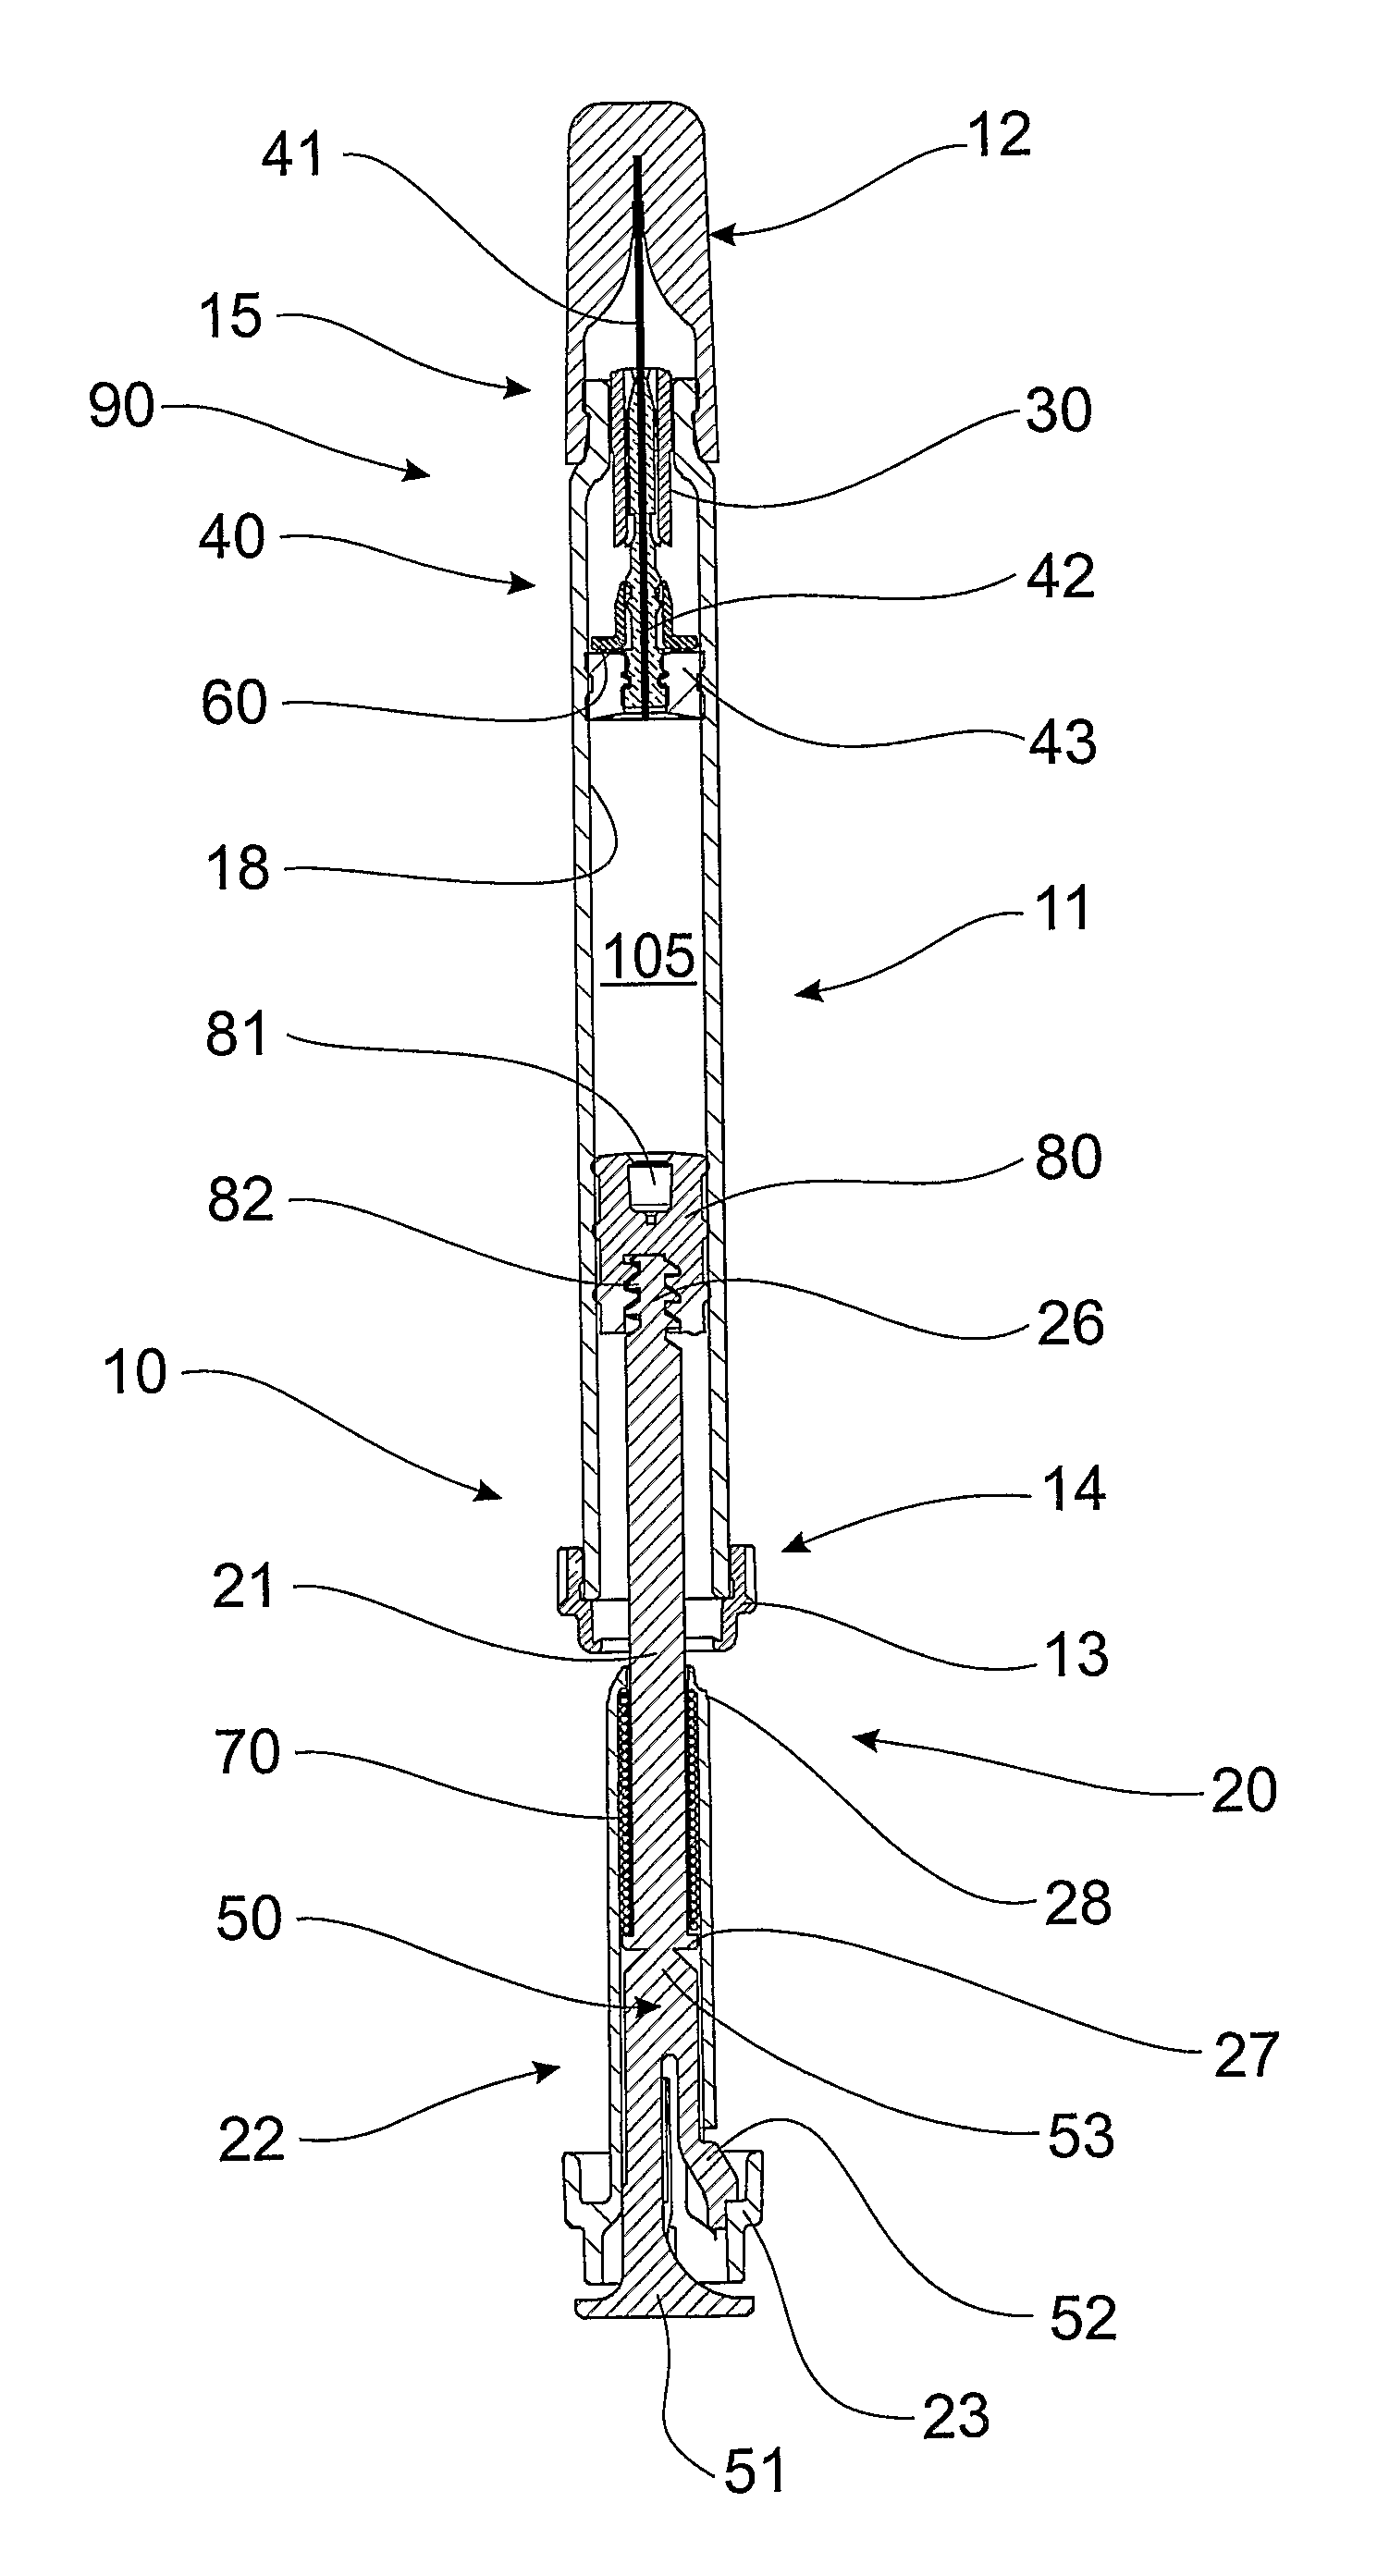 Prefilled retractable syringe, plunger and needle assembly